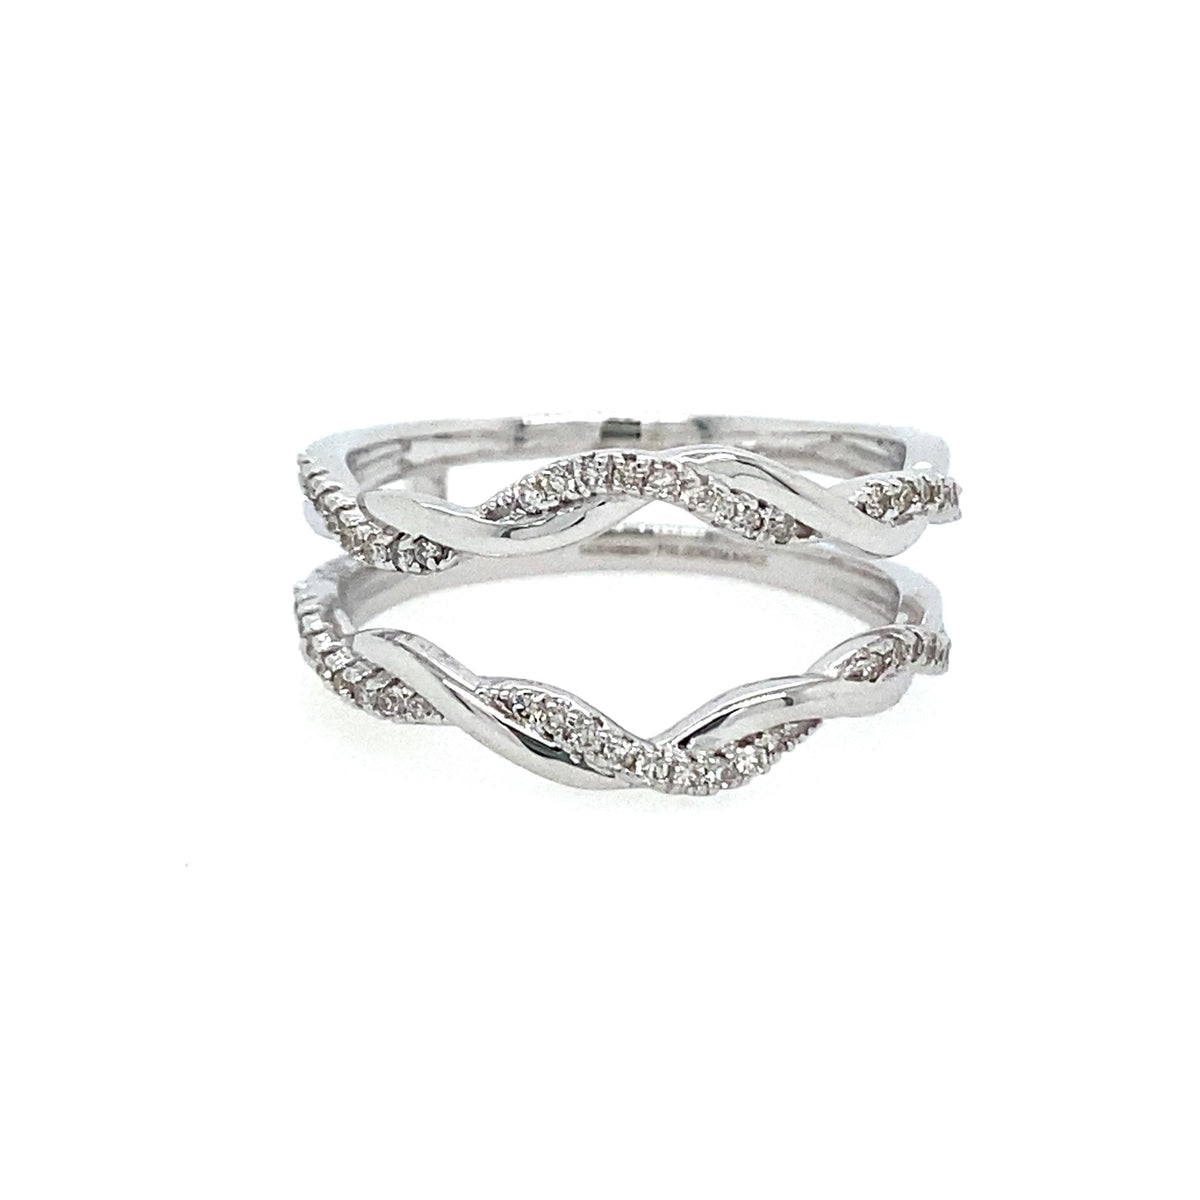 Insert Guard Ring With 0.27cttw Natural Diamonds